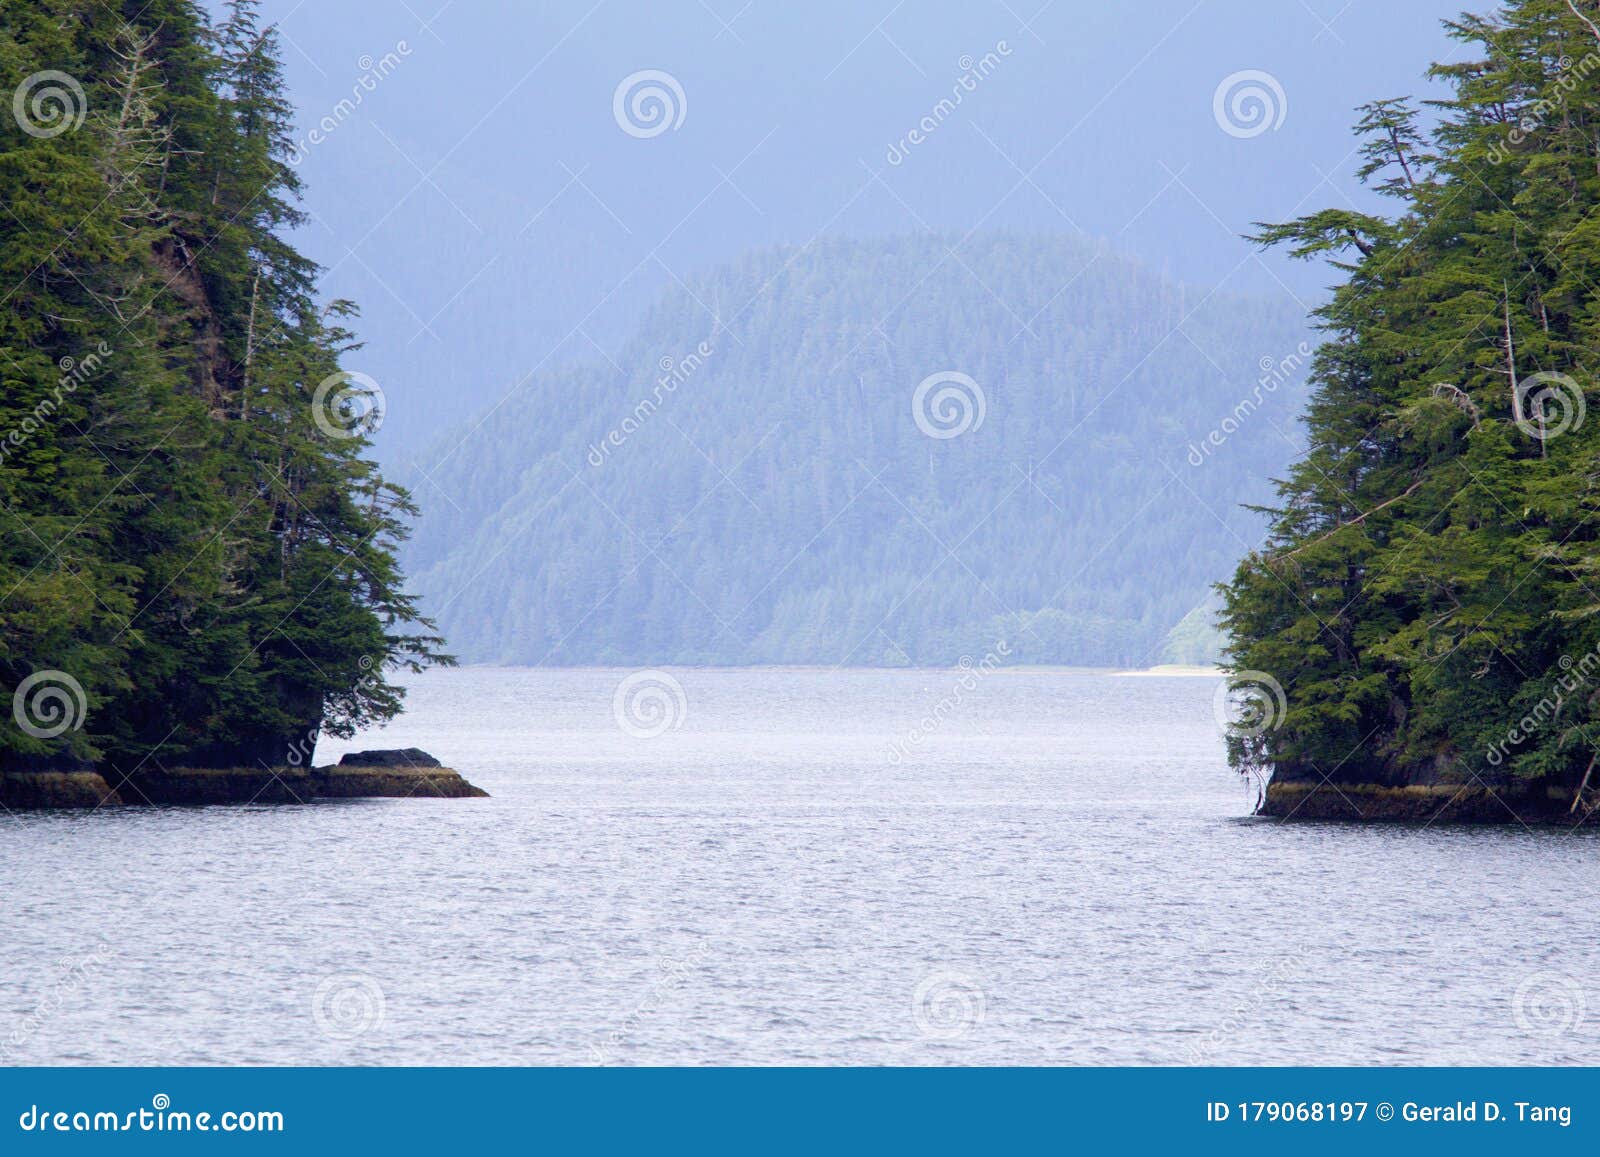 cloudy forest peril strait   845450